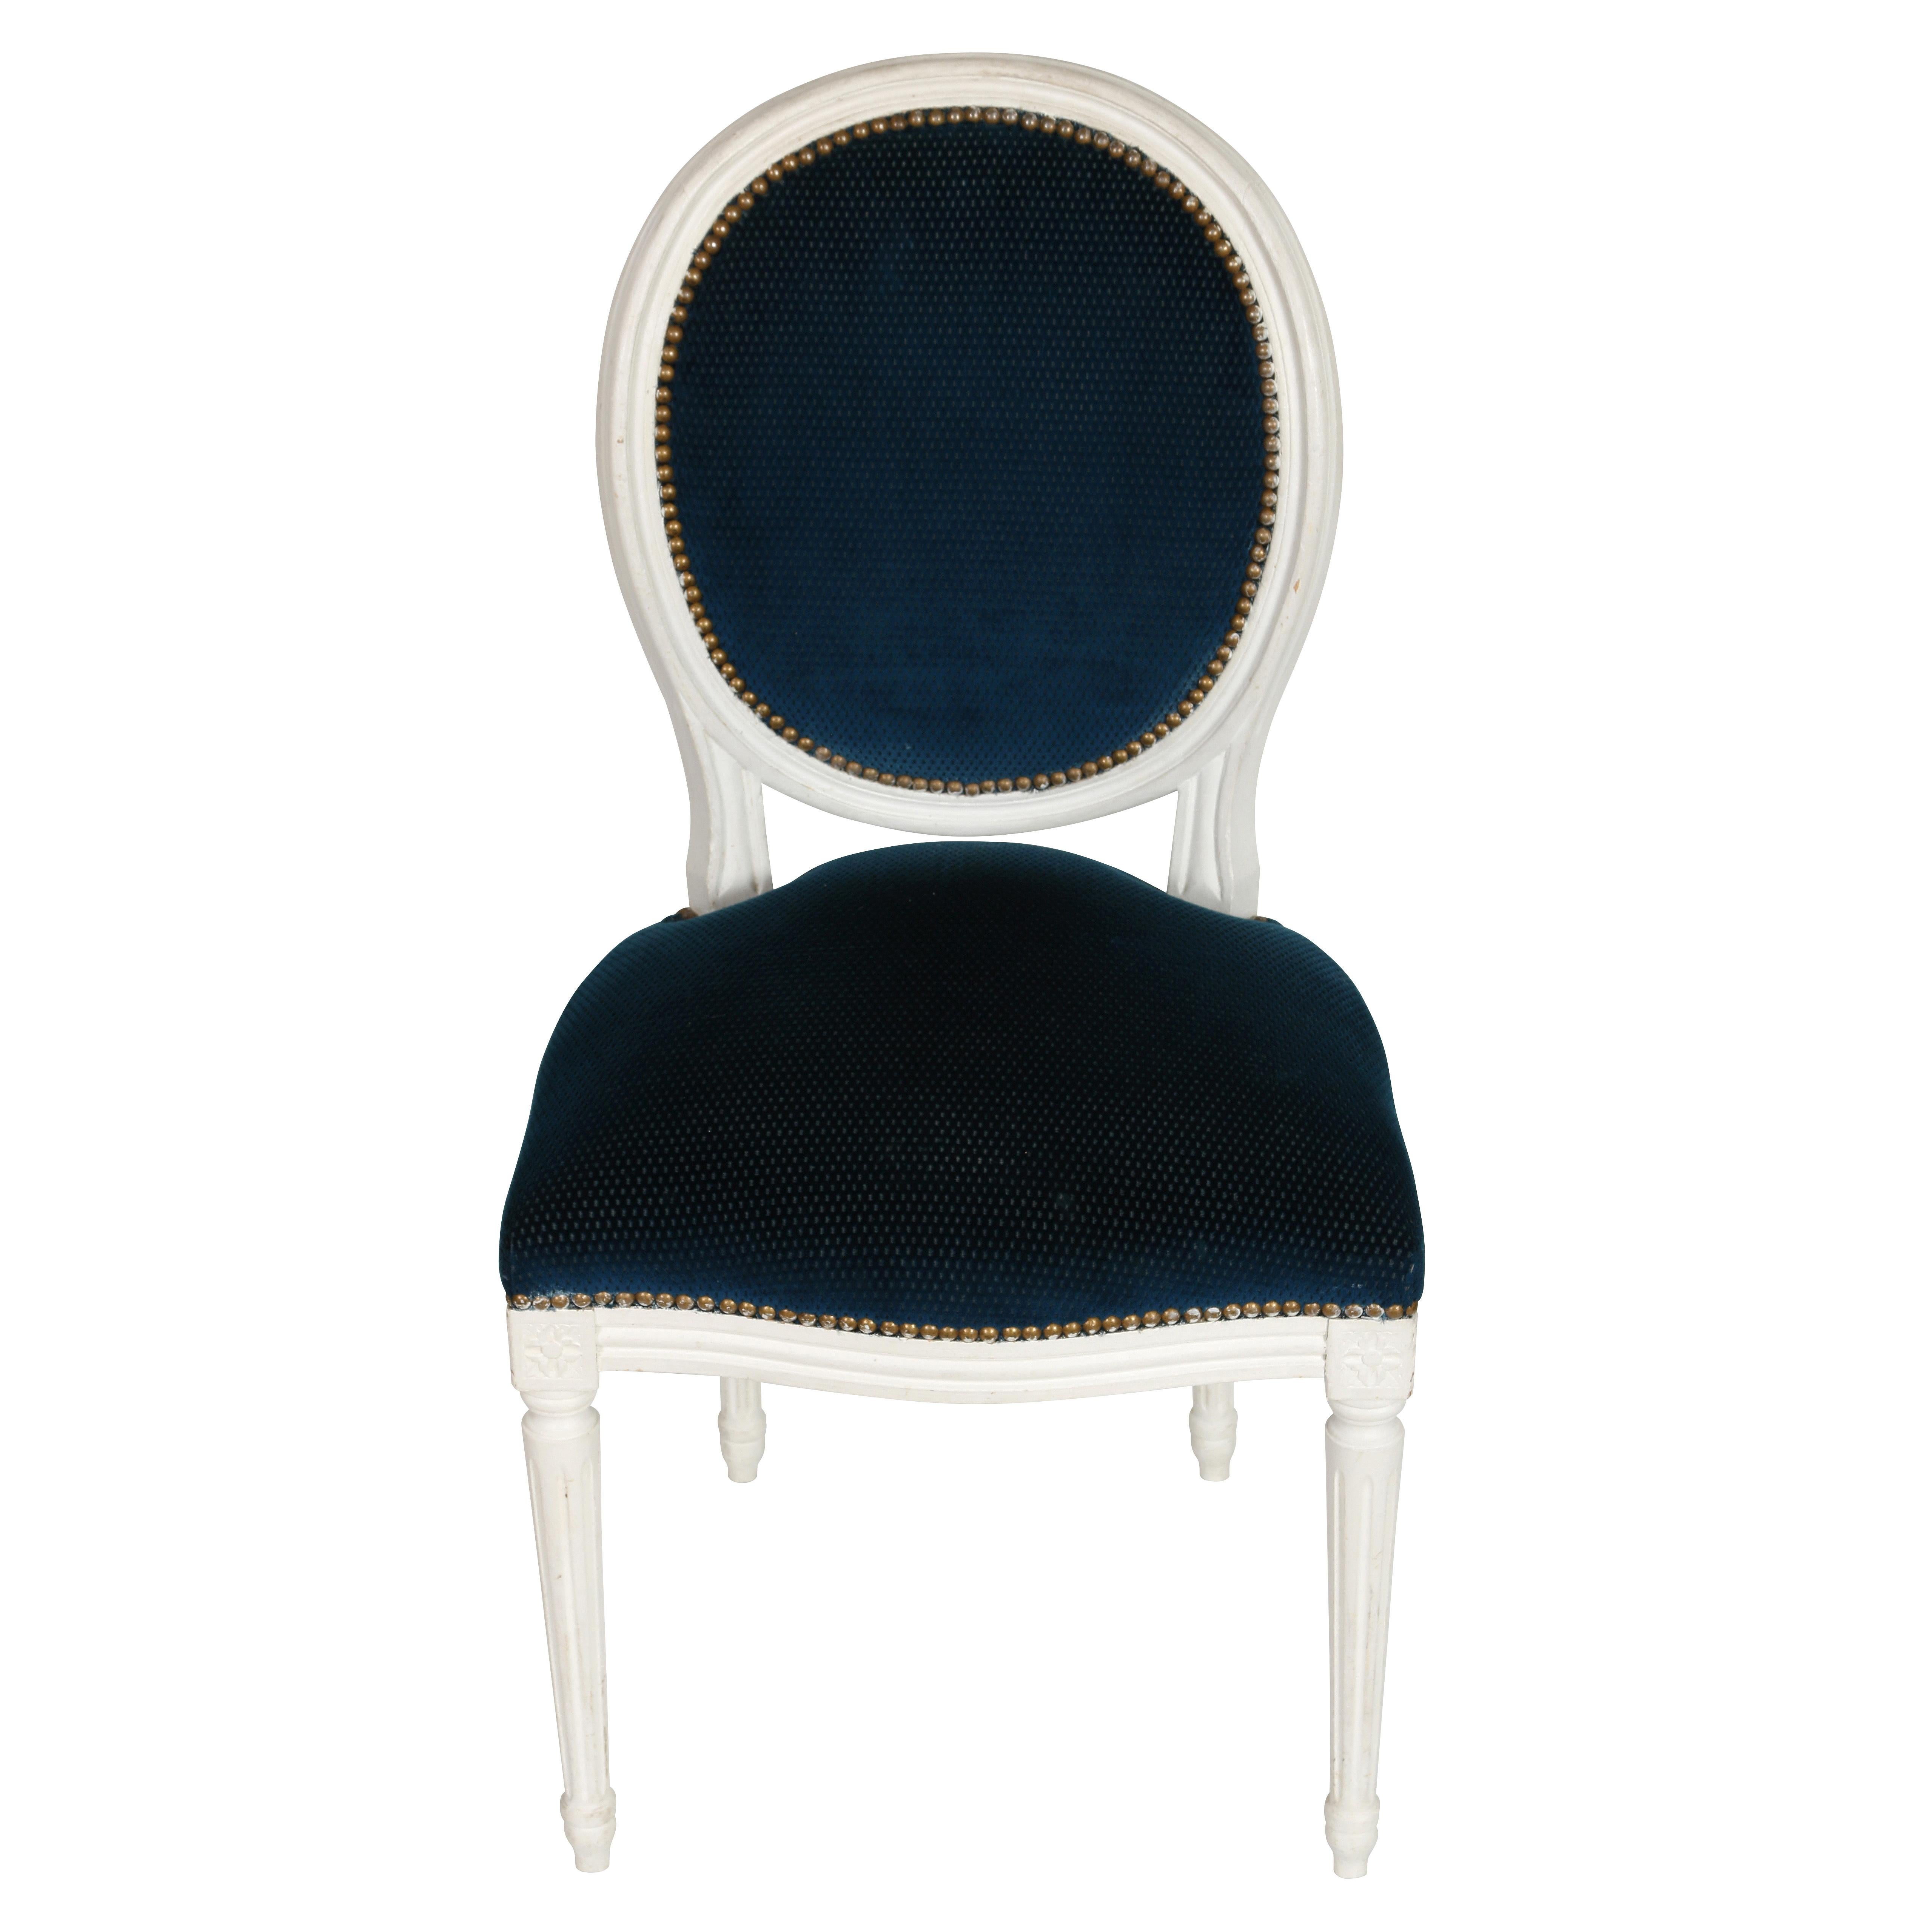 We will never tire of Louis XVI style dining chairs. With their clean, elegant lines, they can go anywhere. These oval back chairs have a white painted finish and are upholstered in a deep blue, finished with nail heads on back and seat. The carved